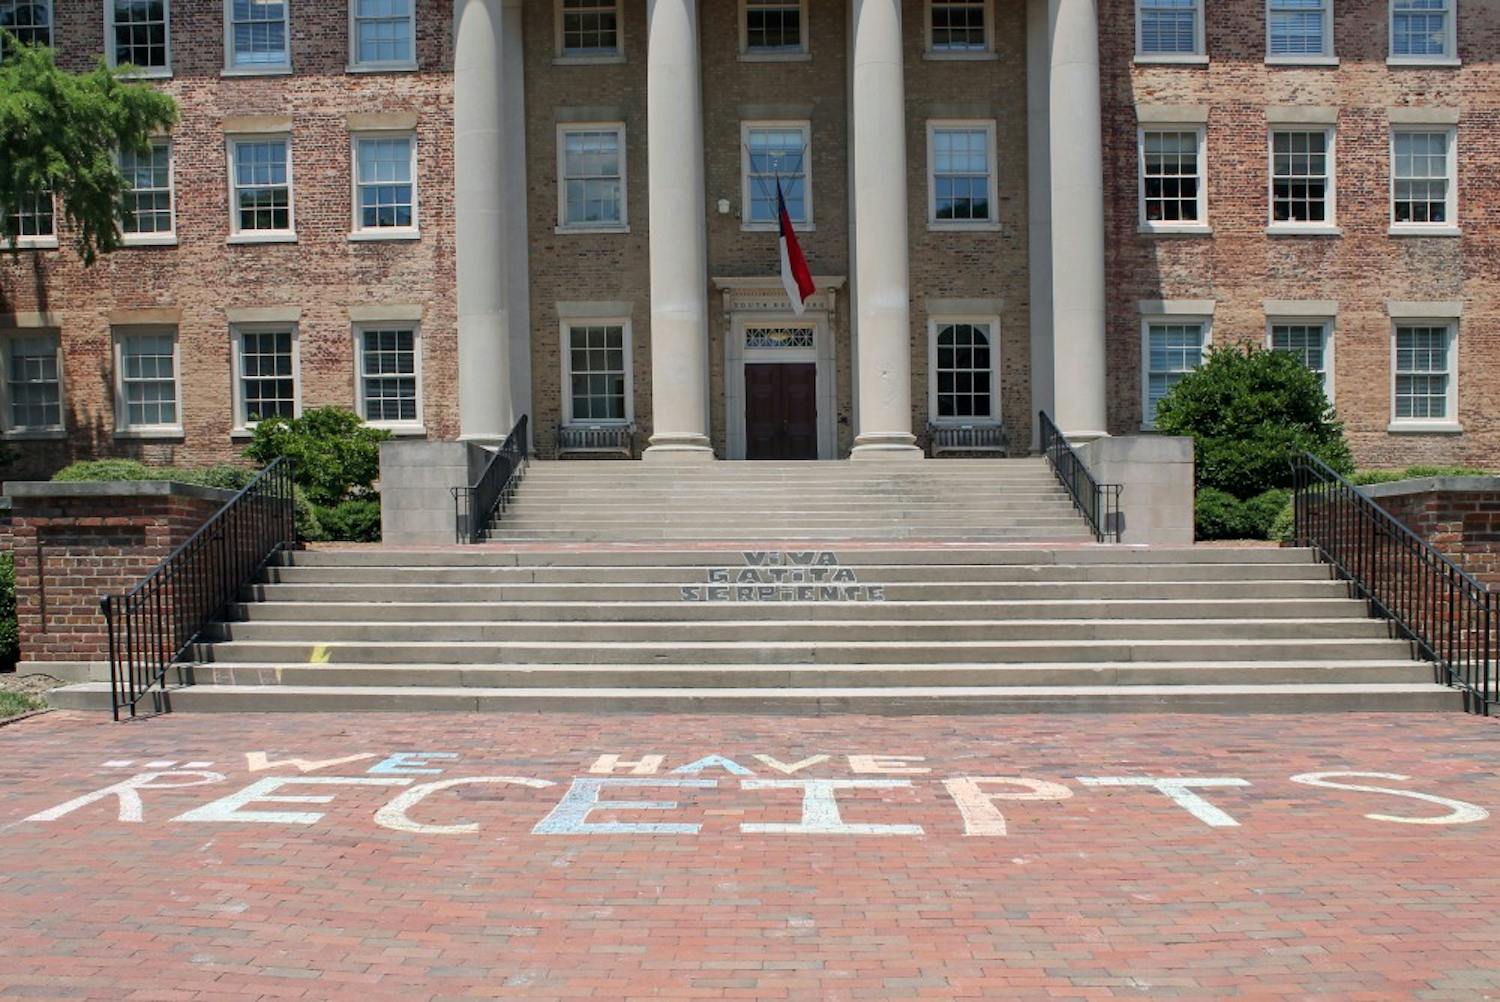 On July 11, protestors chalked "We Have Receipts" on the bricks in front of South Building. 